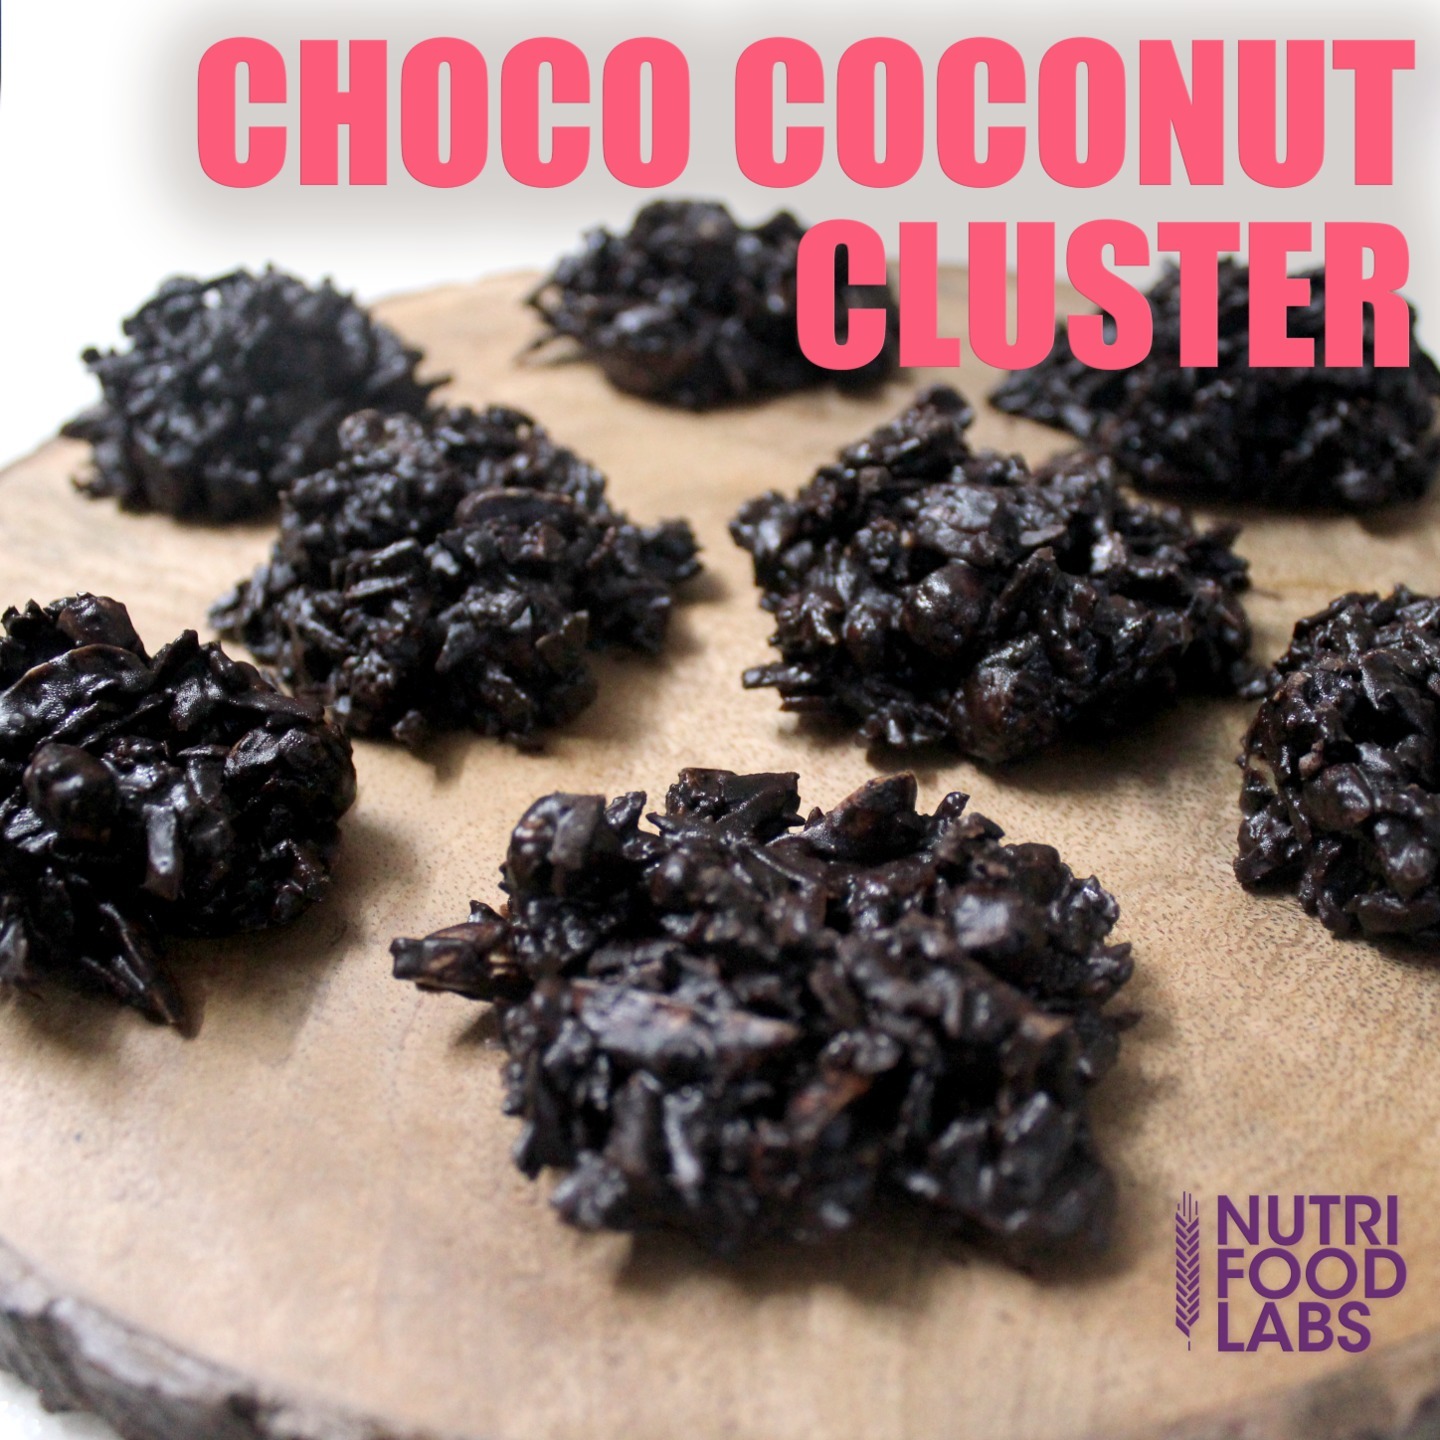 Chocolate Coconut Cluster